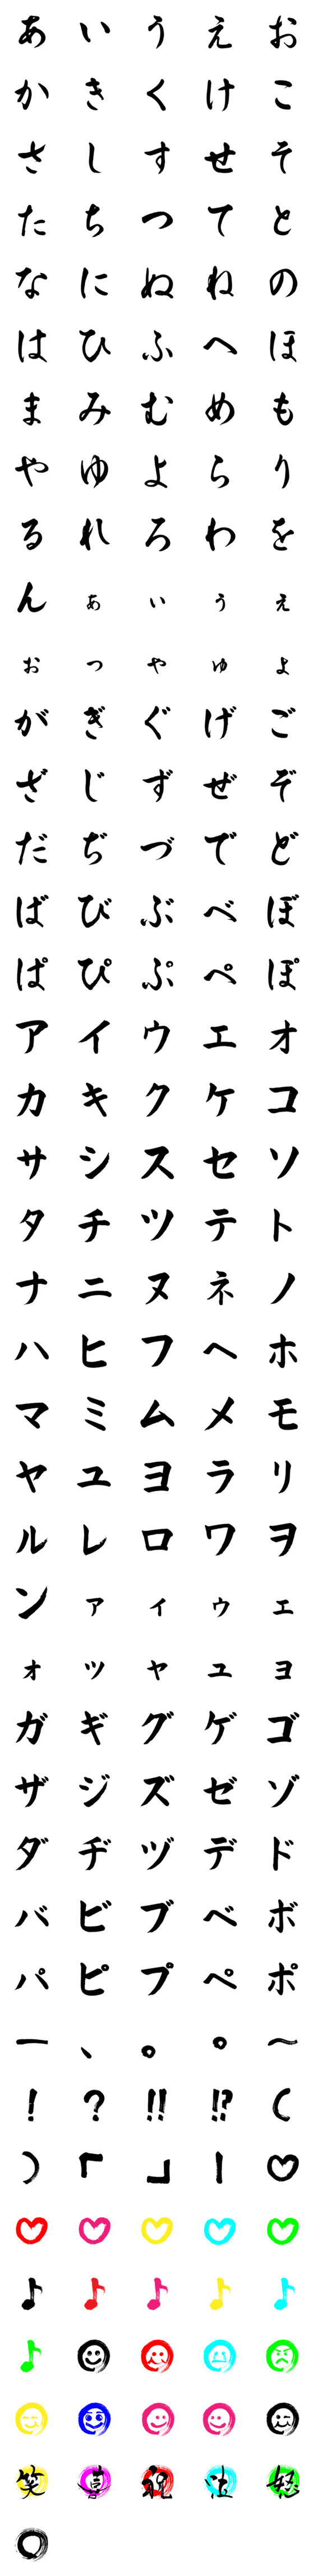 [LINE絵文字]The手書き～かな筆文字＆絵文字♪の画像一覧